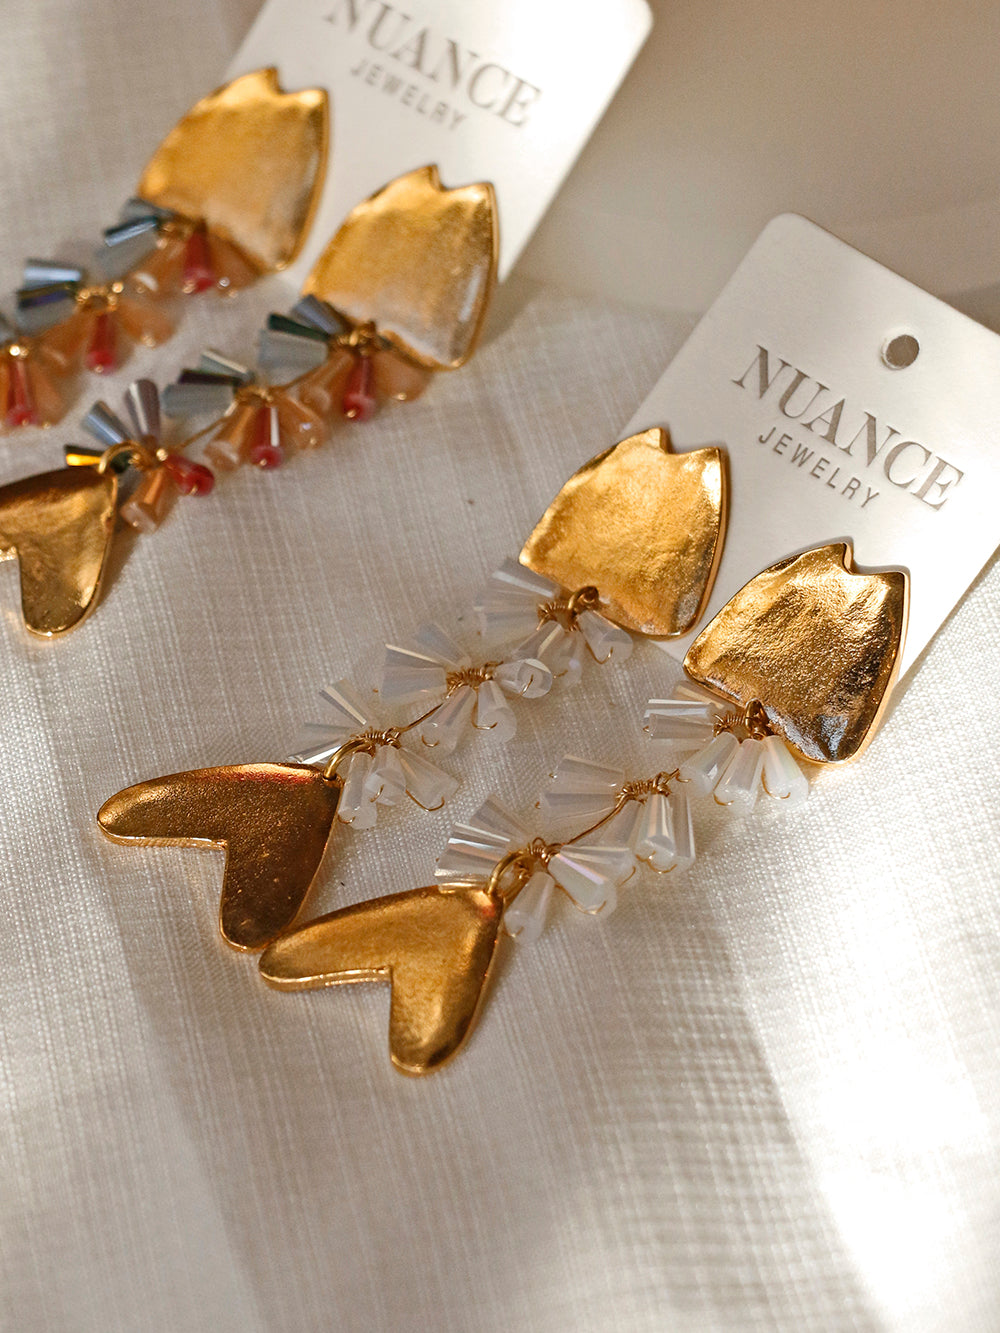 Nuance Fish Earrings | One of a Kind | More Color Options!